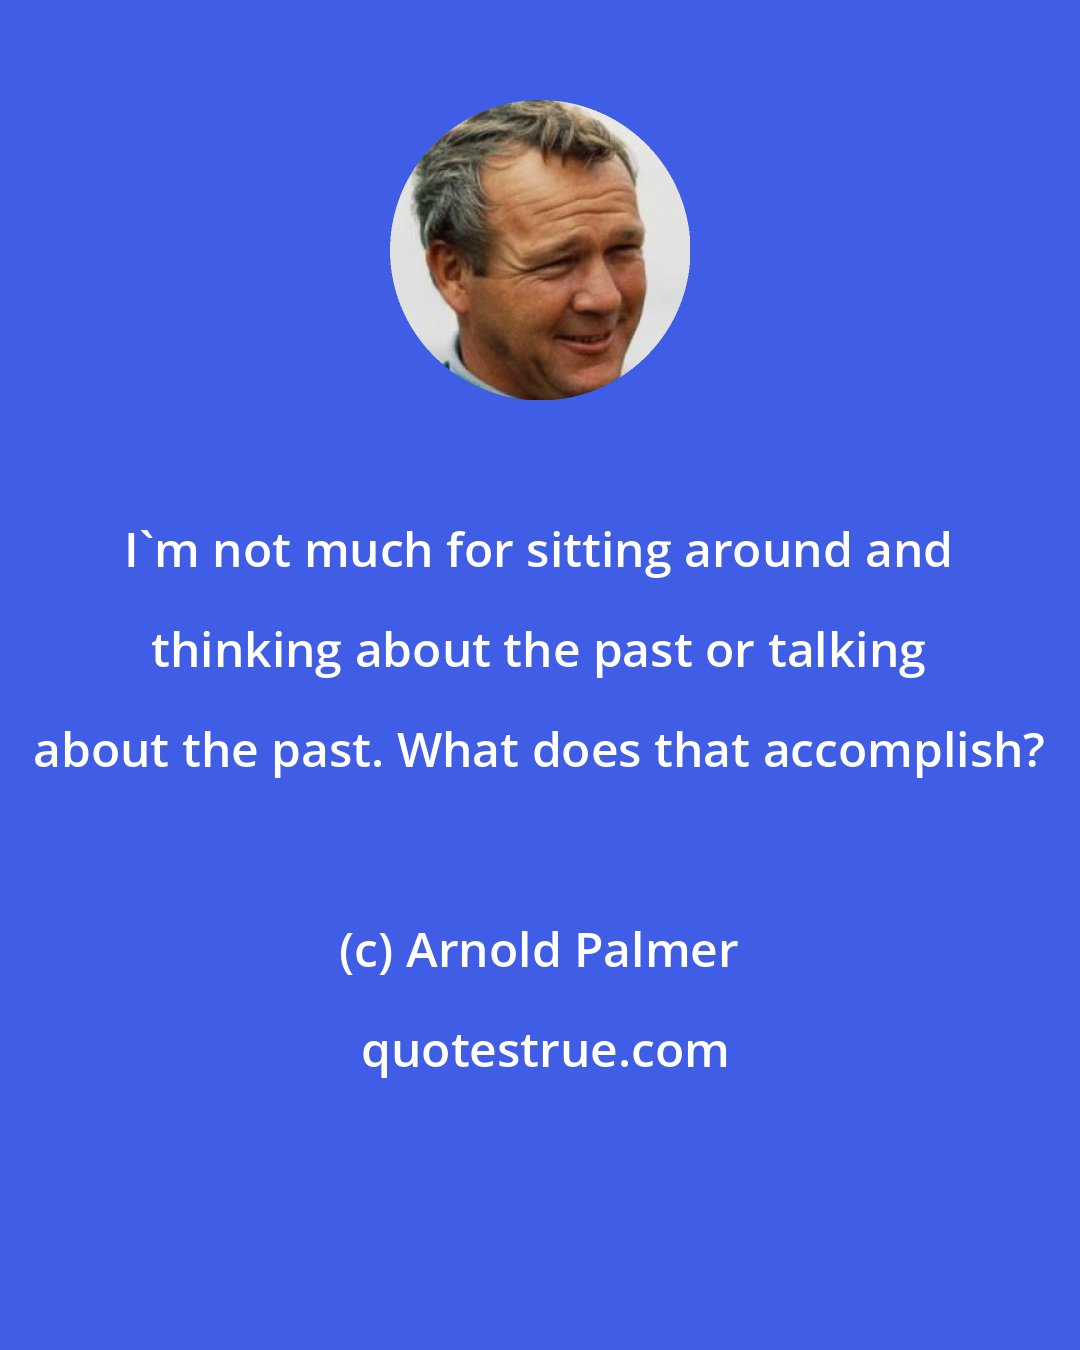 Arnold Palmer: I'm not much for sitting around and thinking about the past or talking about the past. What does that accomplish?